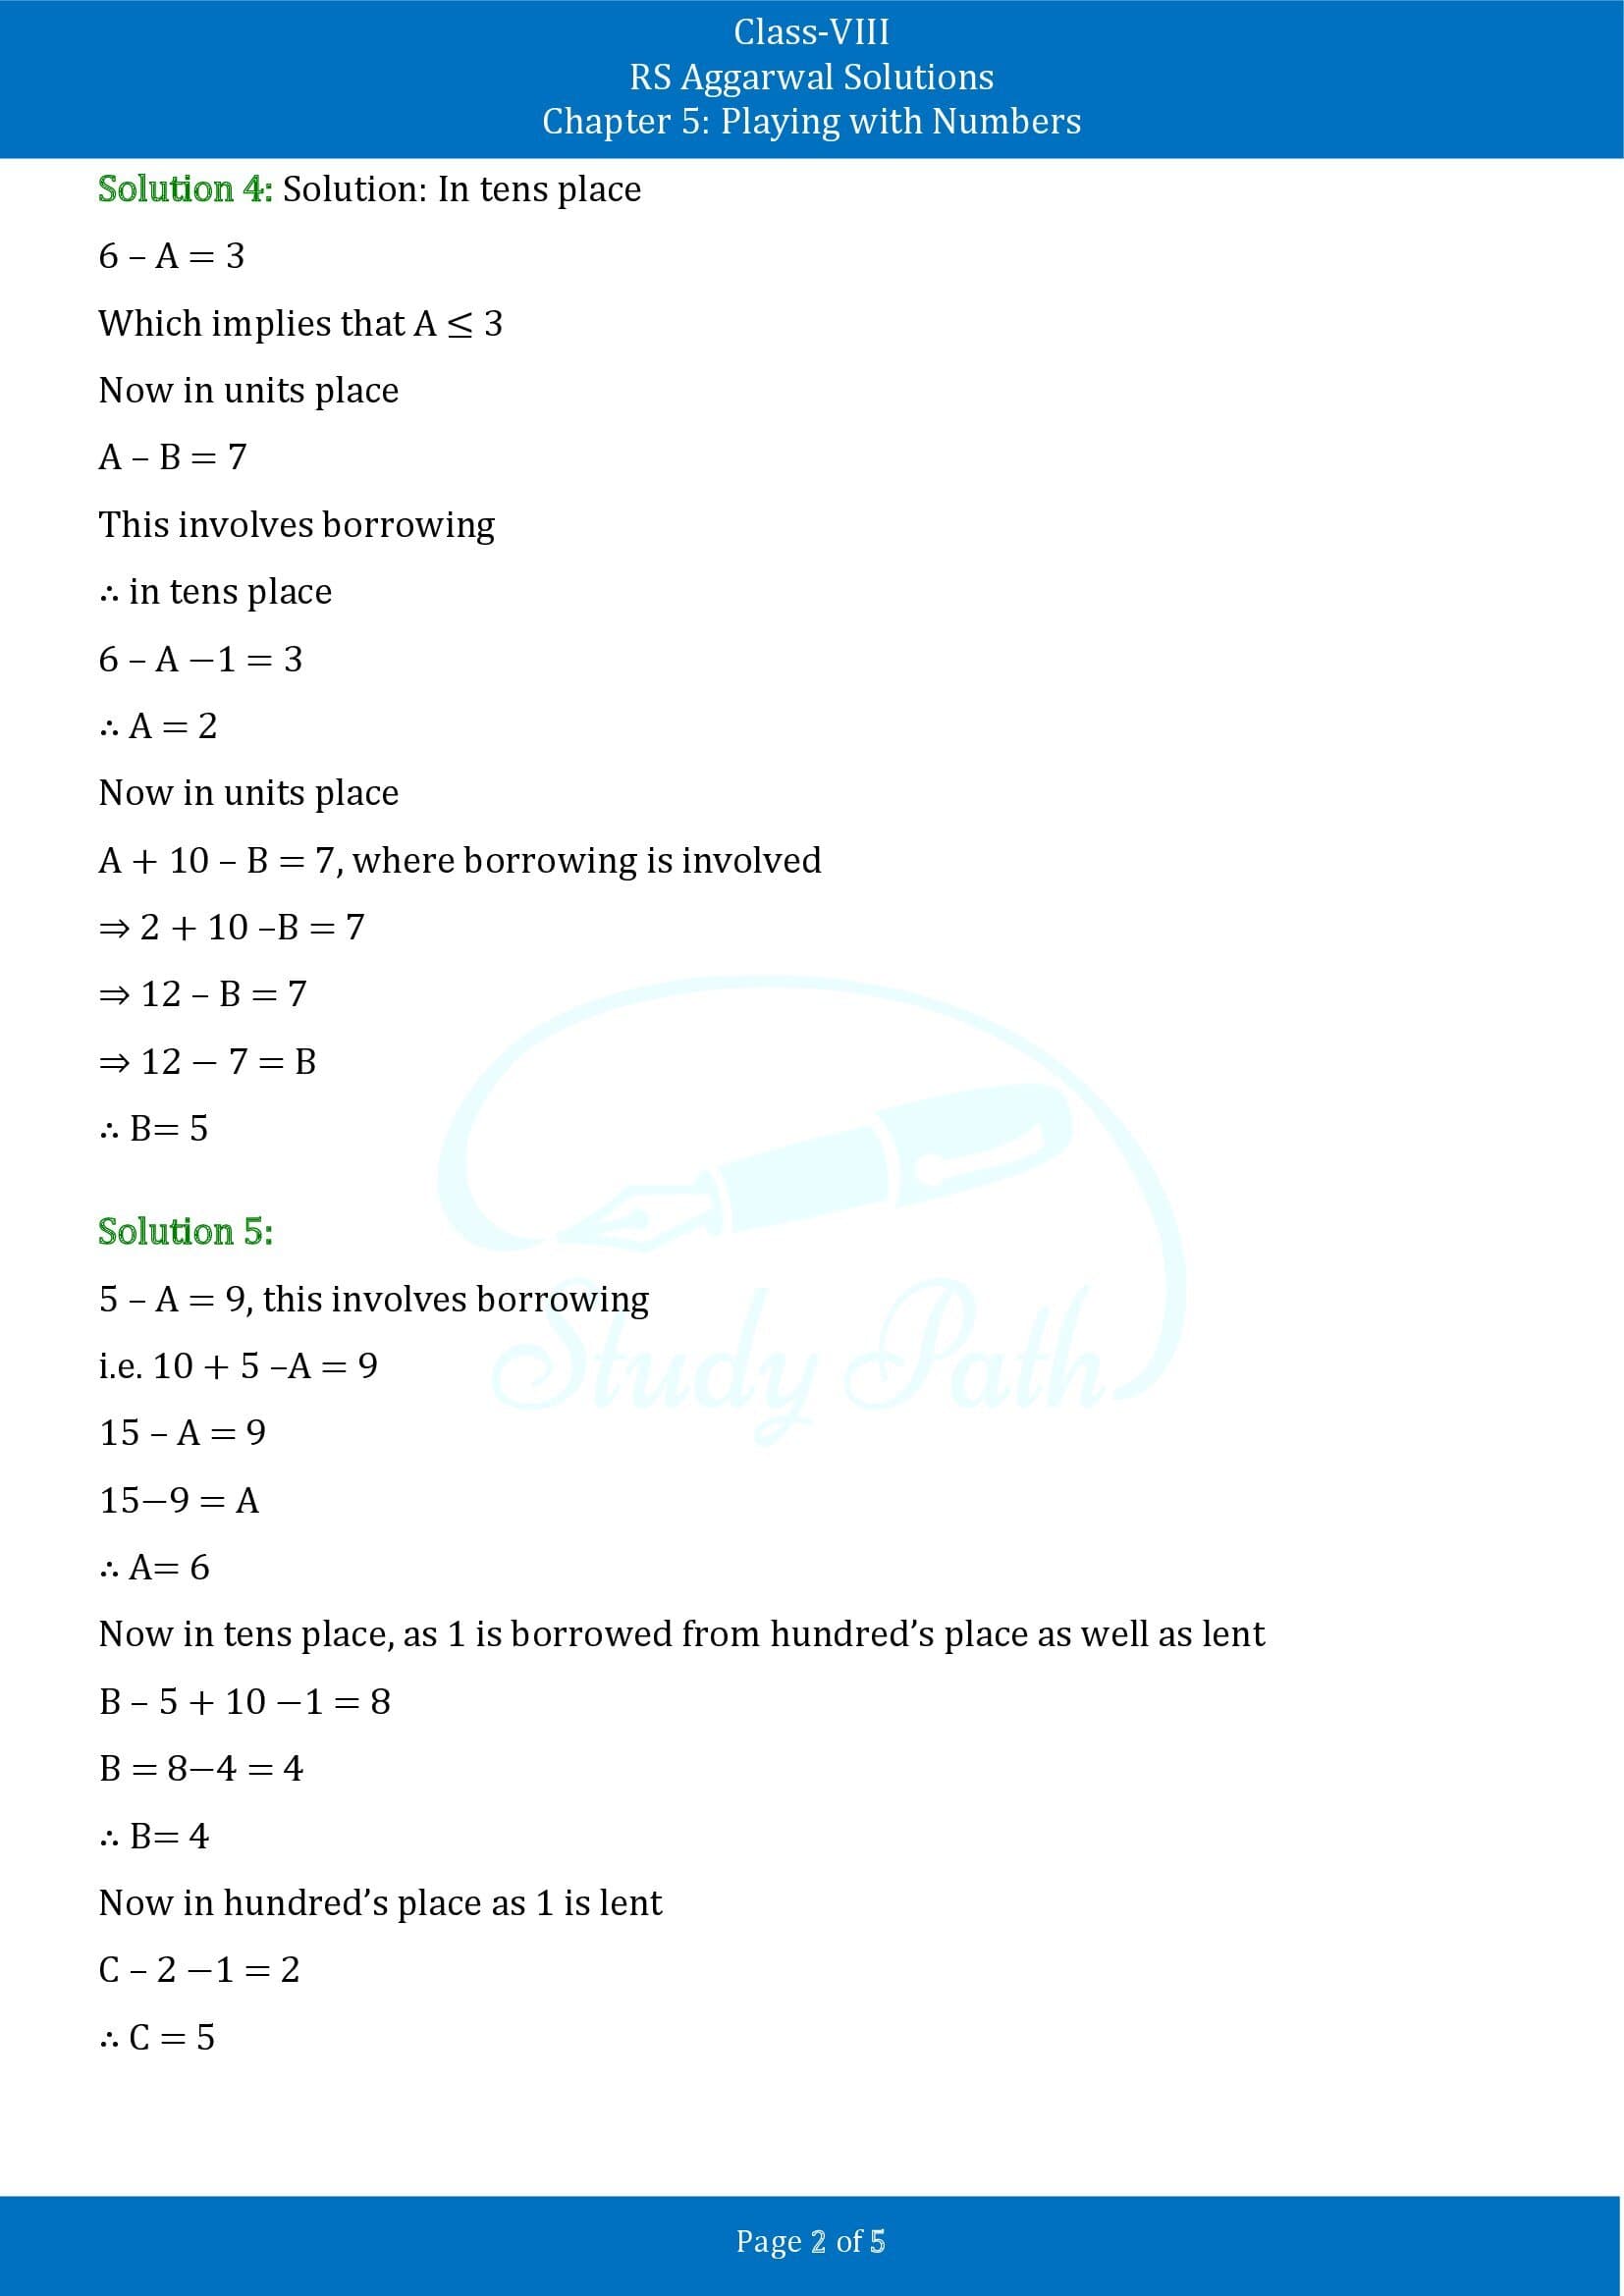 RS Aggarwal Solutions Class 8 Chapter 5 Playing with Numbers Exercise 5C 00002